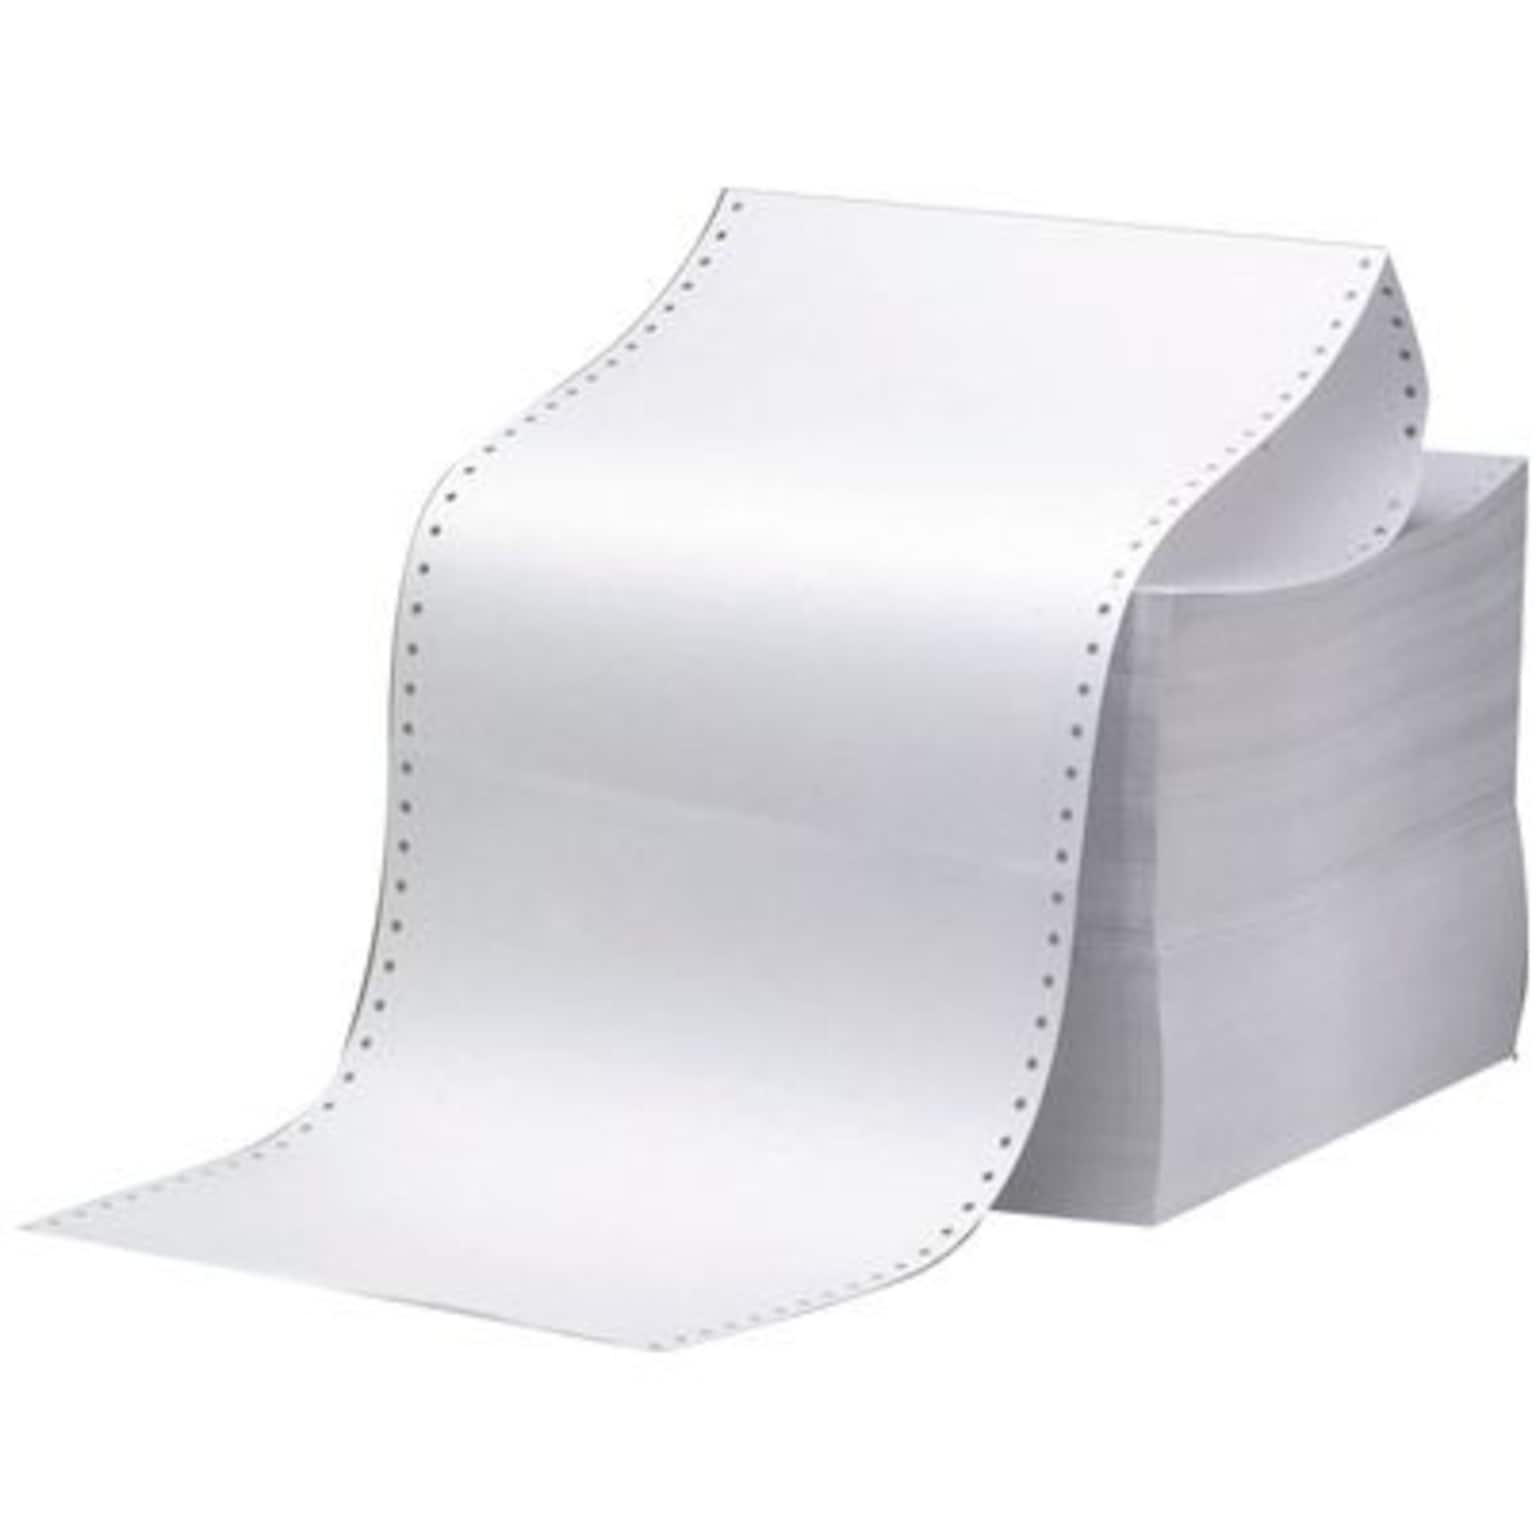 Quill Brand® 9.5 x 11 Continuous Form Paper, 18 lbs., 92 Brightness 2550 Sheets/Carton (710608)